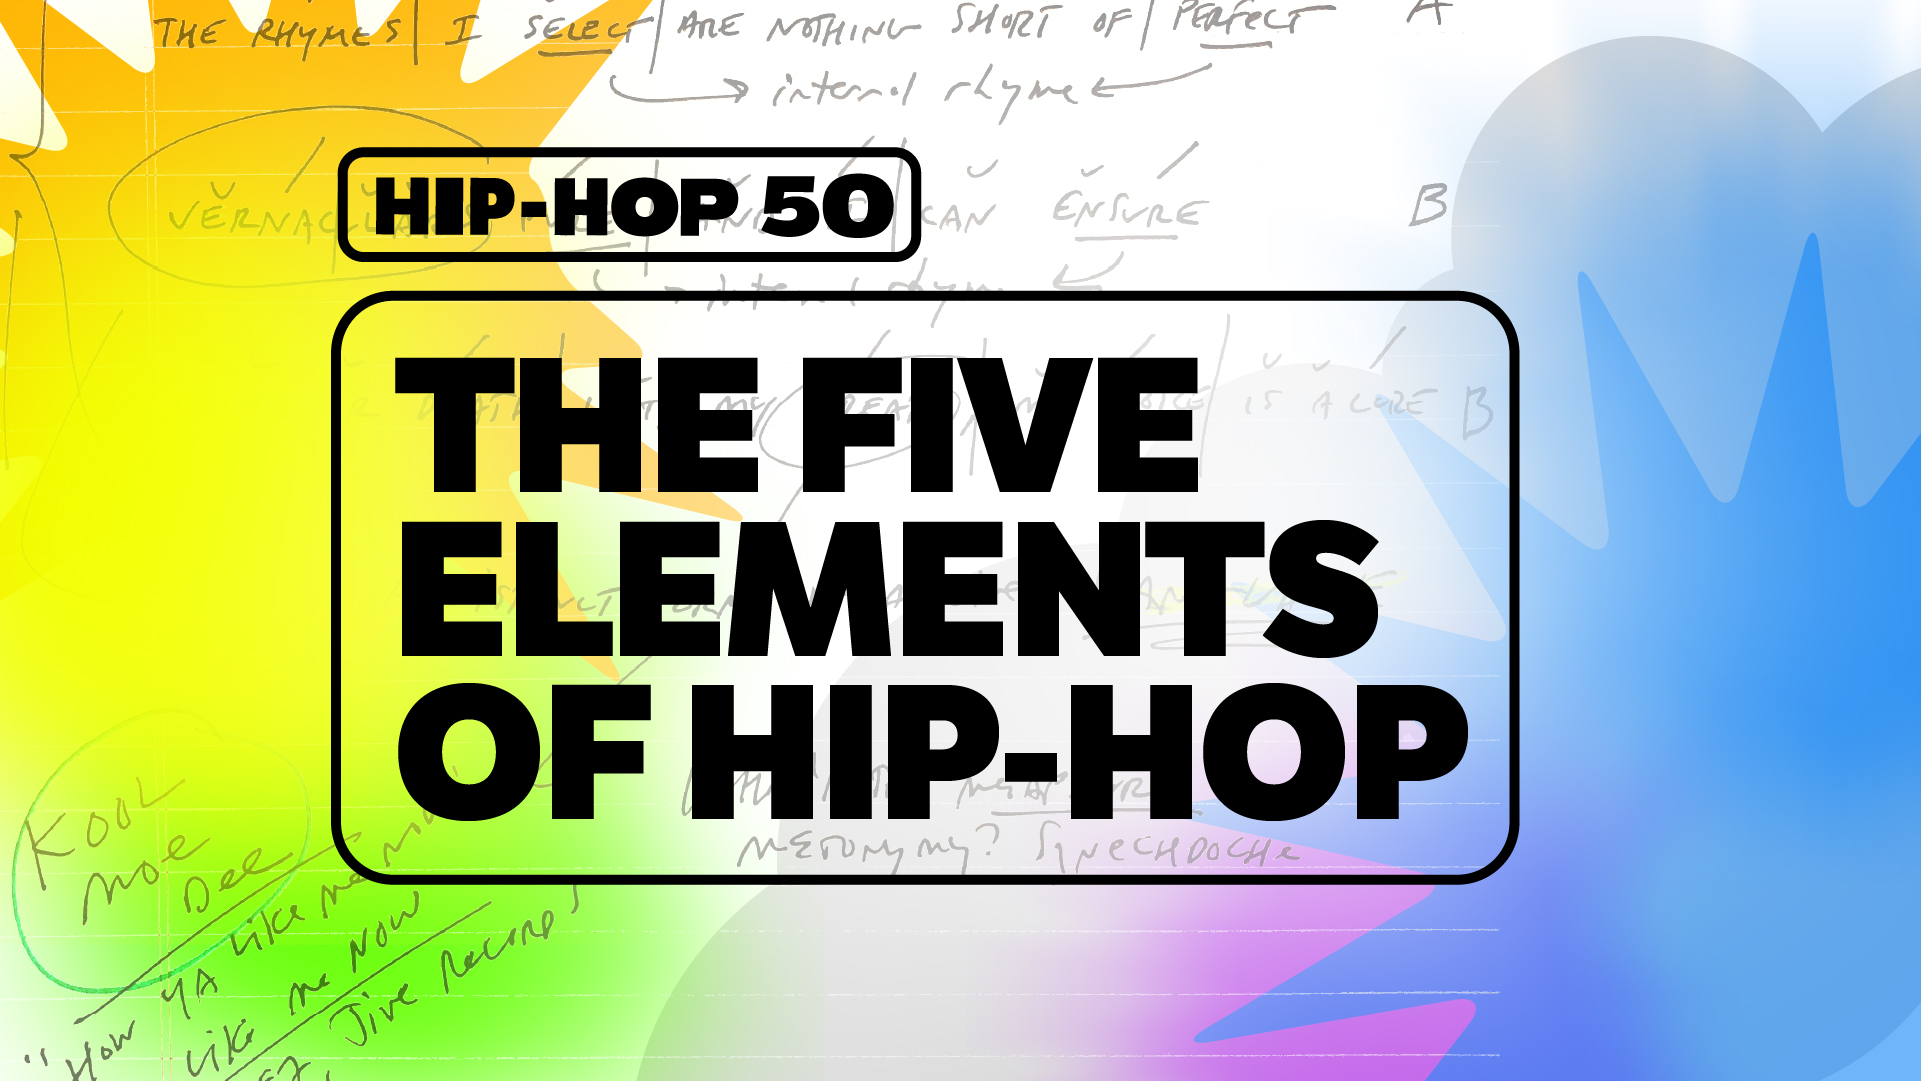 Where Did 'Hip Hop' Get Its Name?